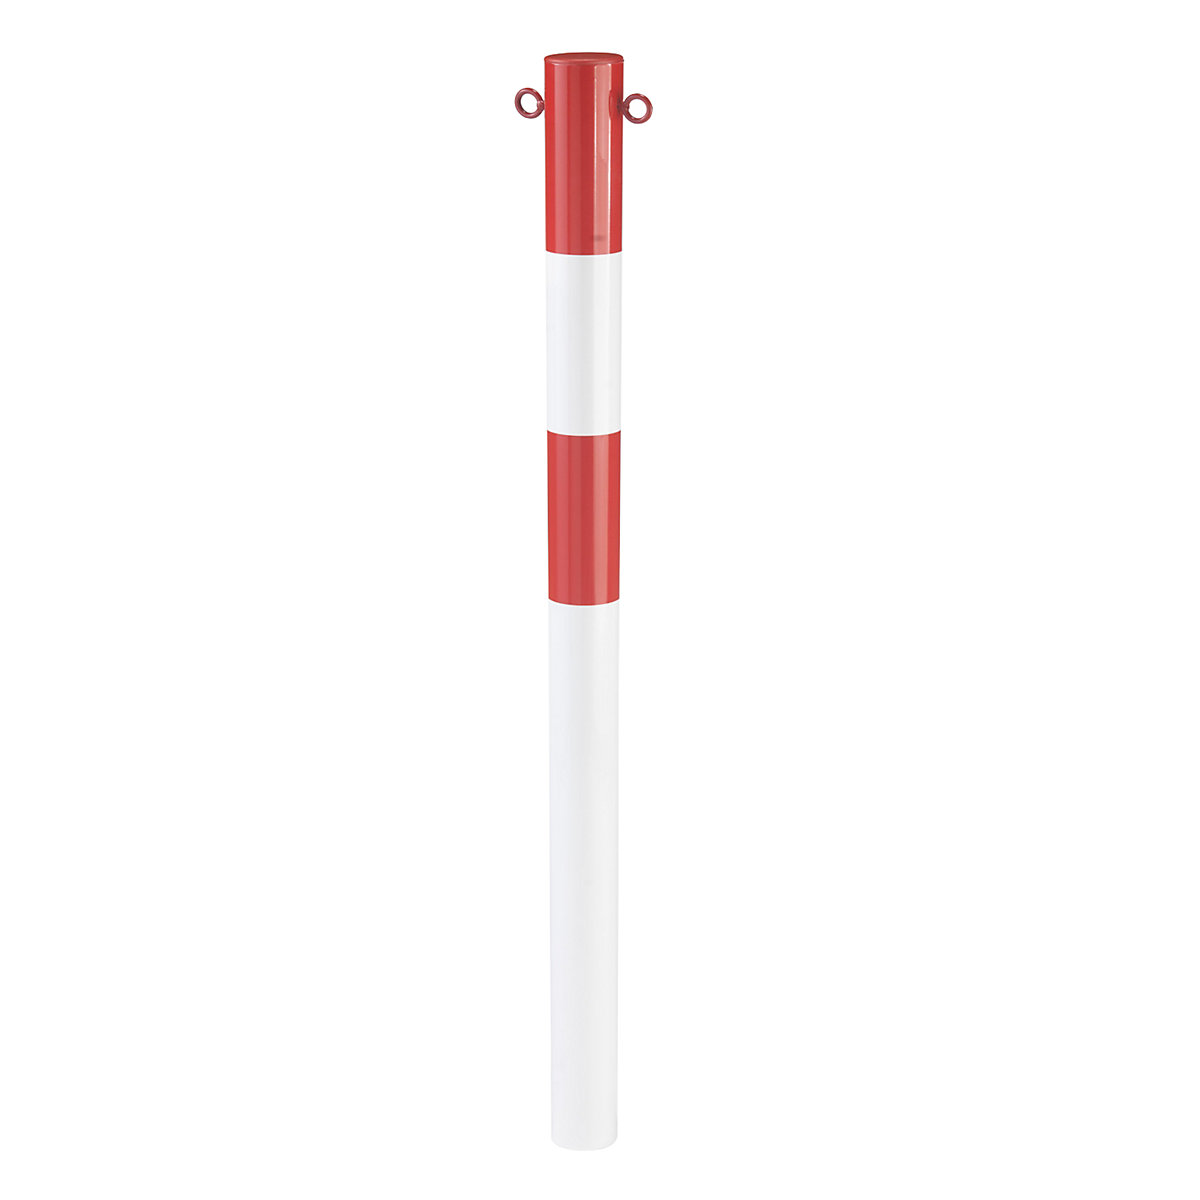 Barrier post made of tubular steel, for concreting in, Ø 76 mm, red / white, zinc plated and painted-4